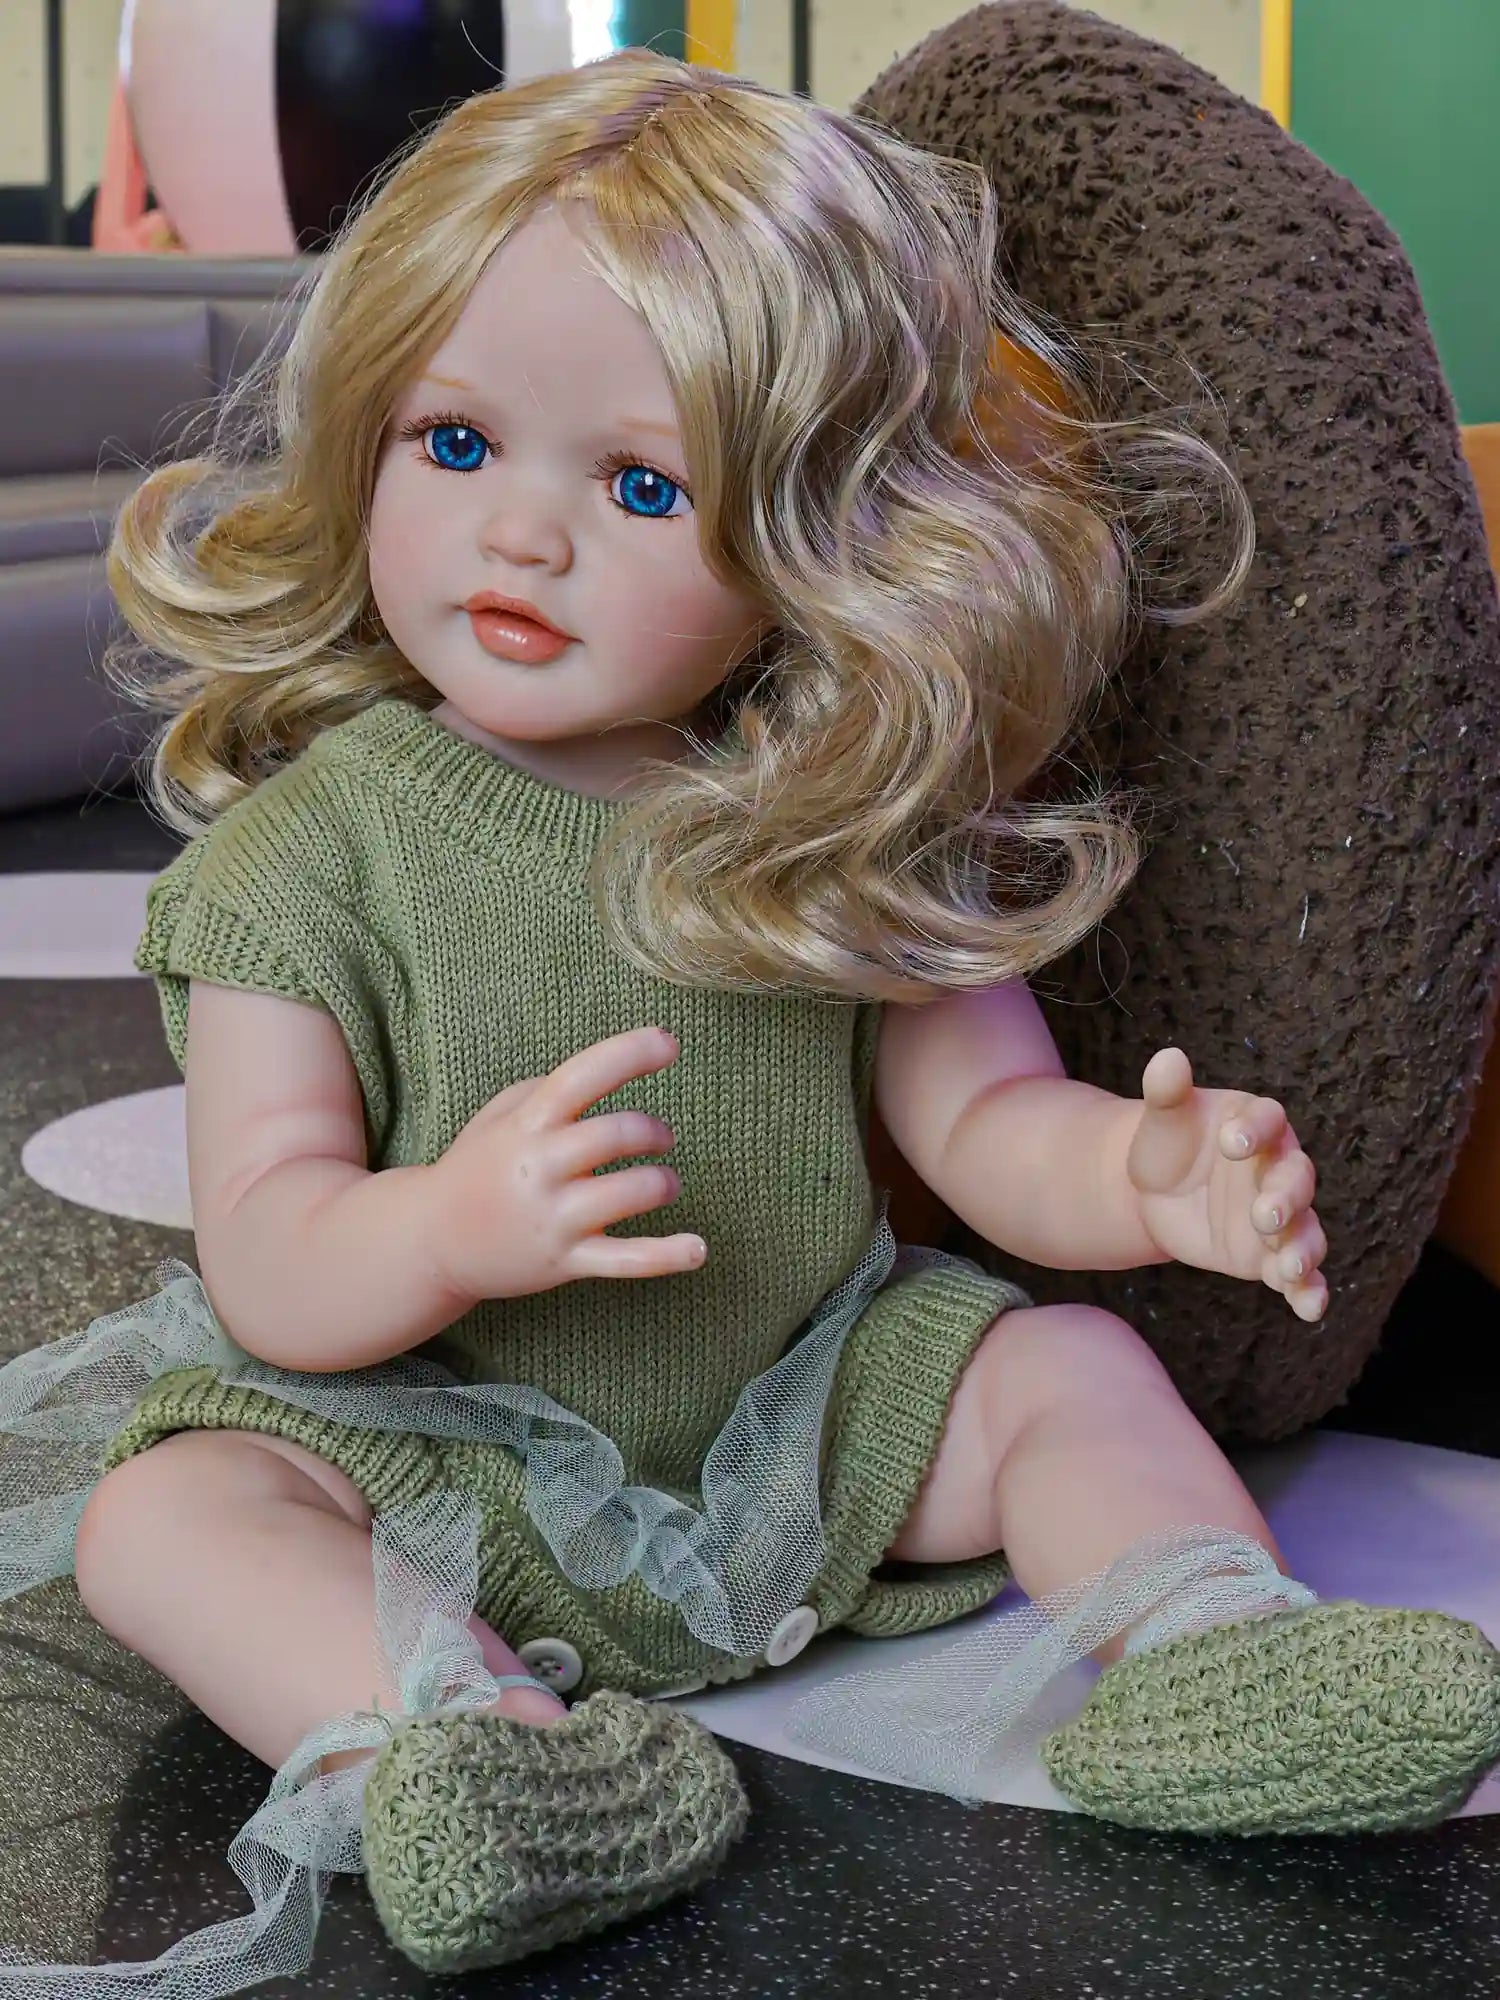 A lifelike reborn doll sitting comfortably, with soft blonde curls and clear blue eyes, dressed in a green outfit with a tulle skirt.